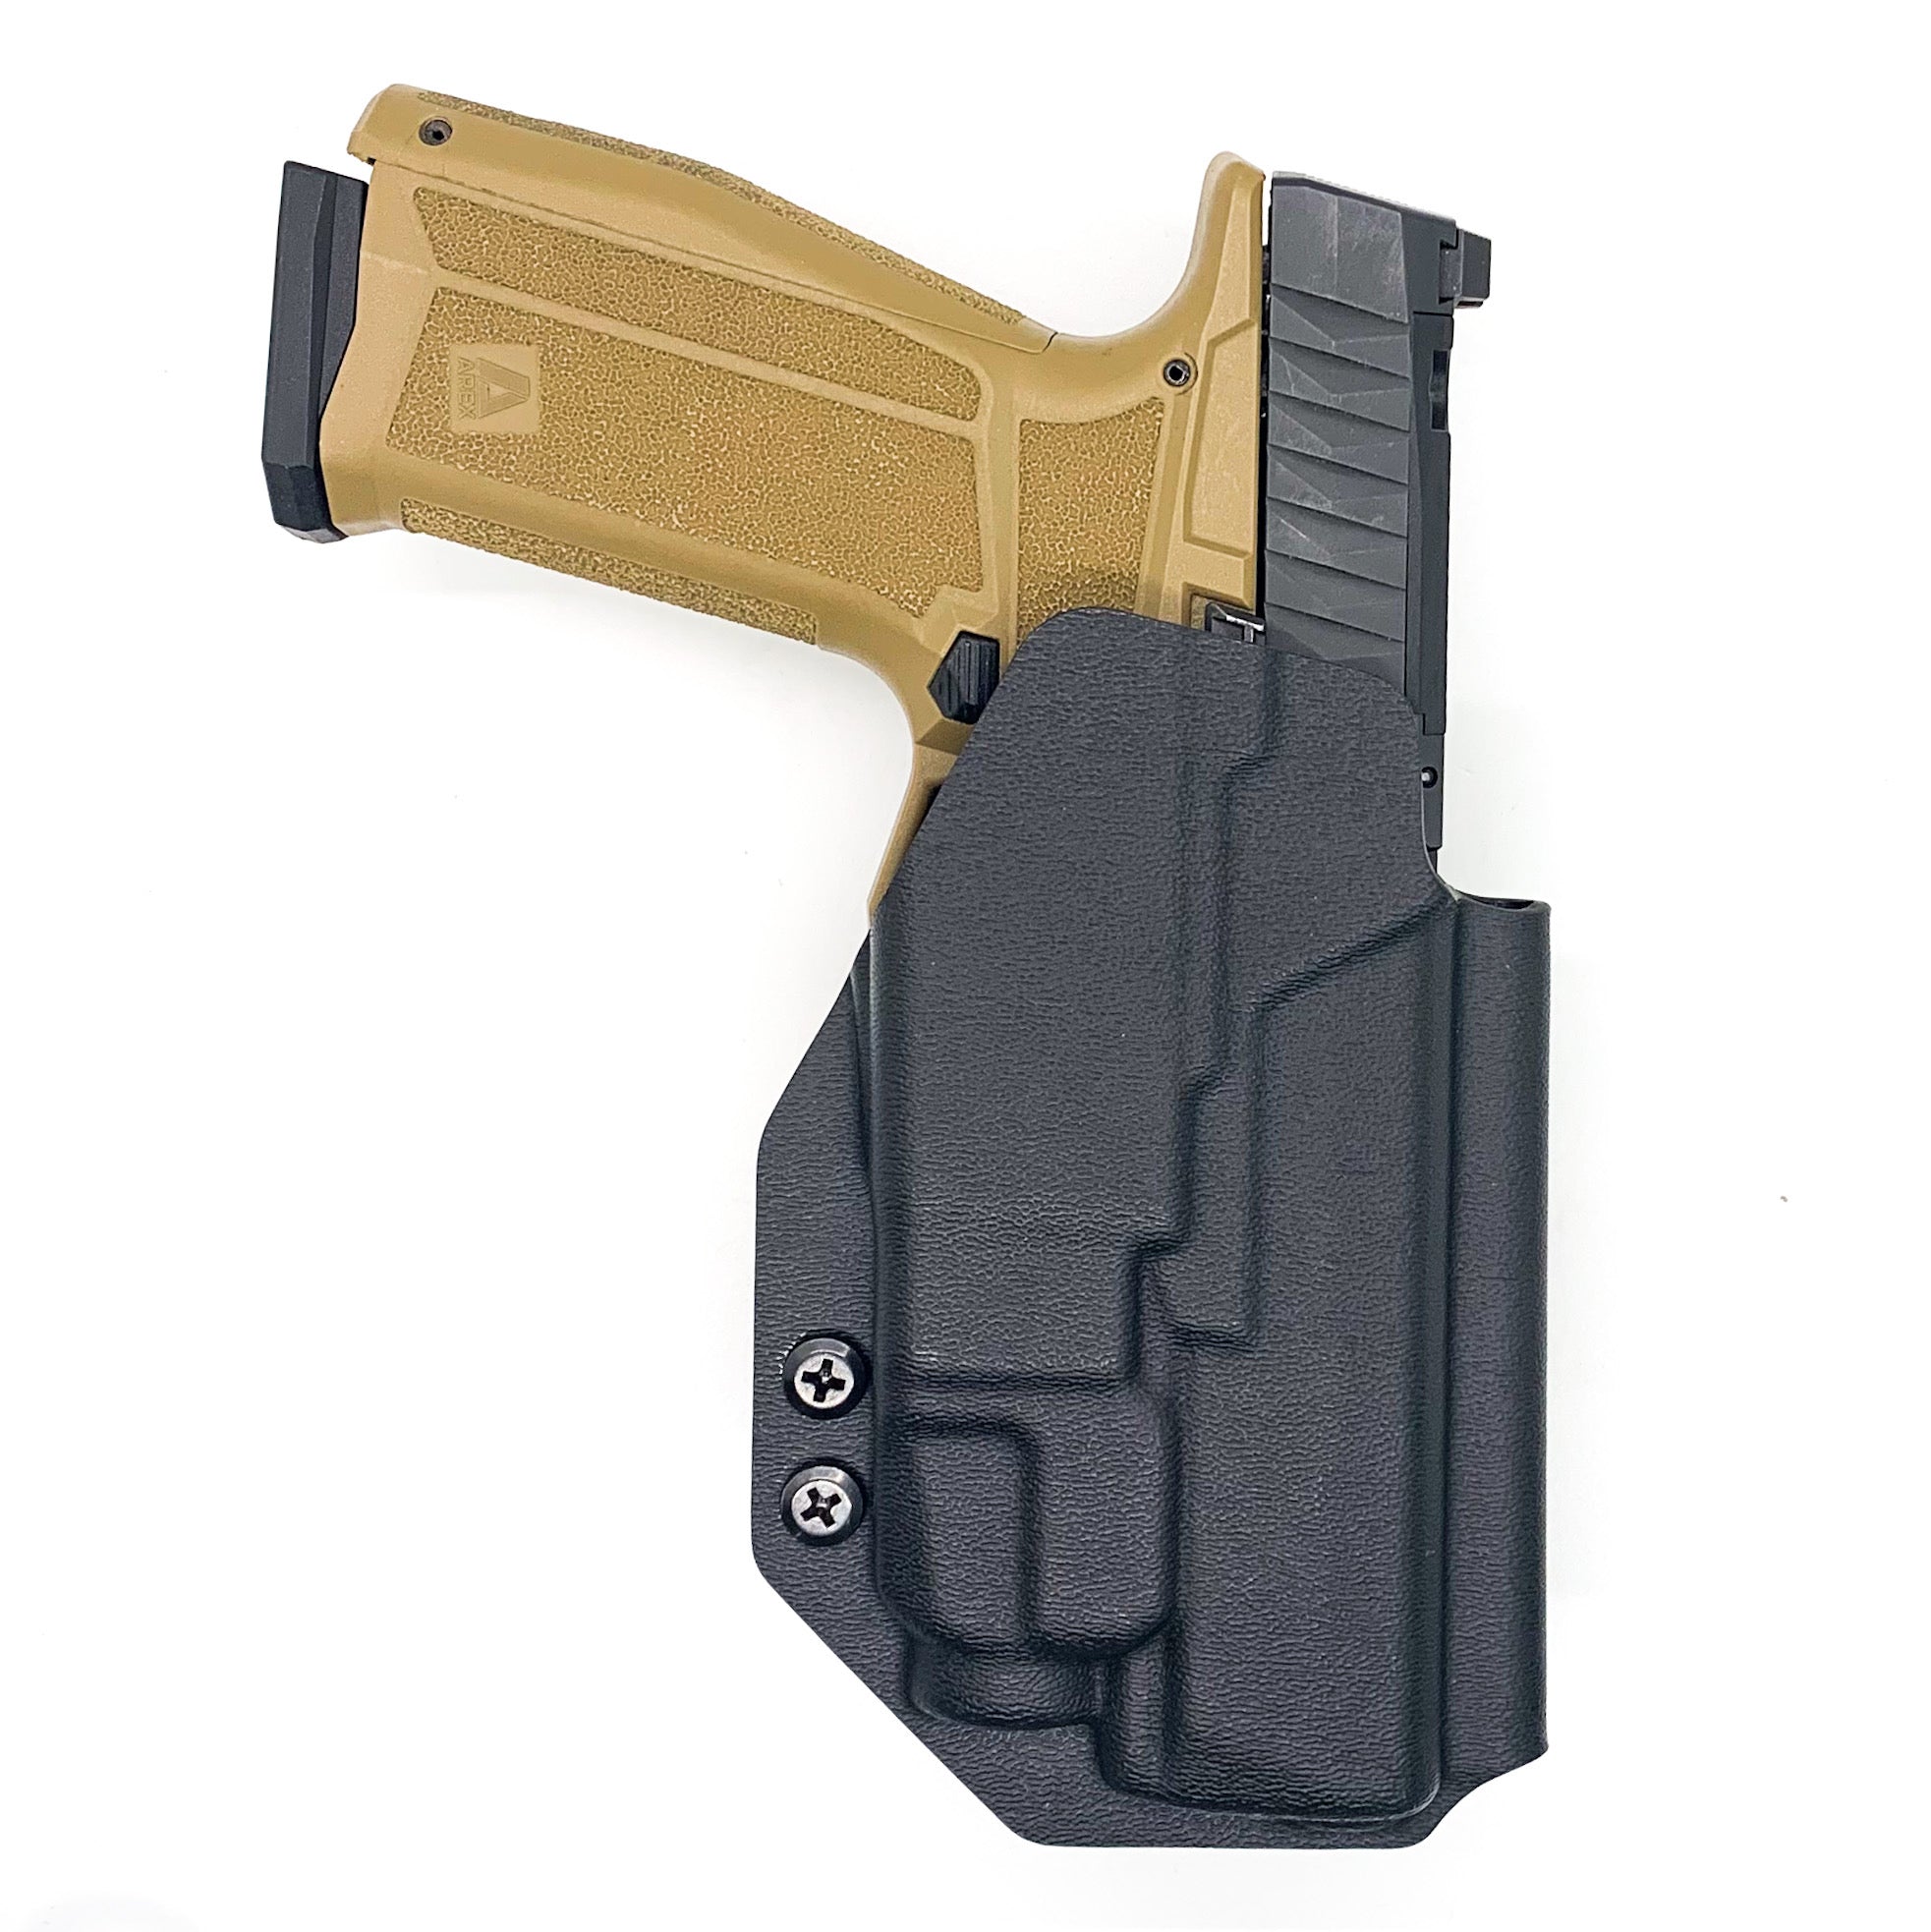 Outside Waistband holster designed to fit the Arex Delta L, Delta M and Delta X pistols with the Streamlight TLR-7 or TLR-7A Weapon Mounted Light. Adjustable retention Holster profile cut for red dot sights. Blade-Tech Tek-Lok belt attachment standard Made from .080" thick thermoplastic High sweat shield standard